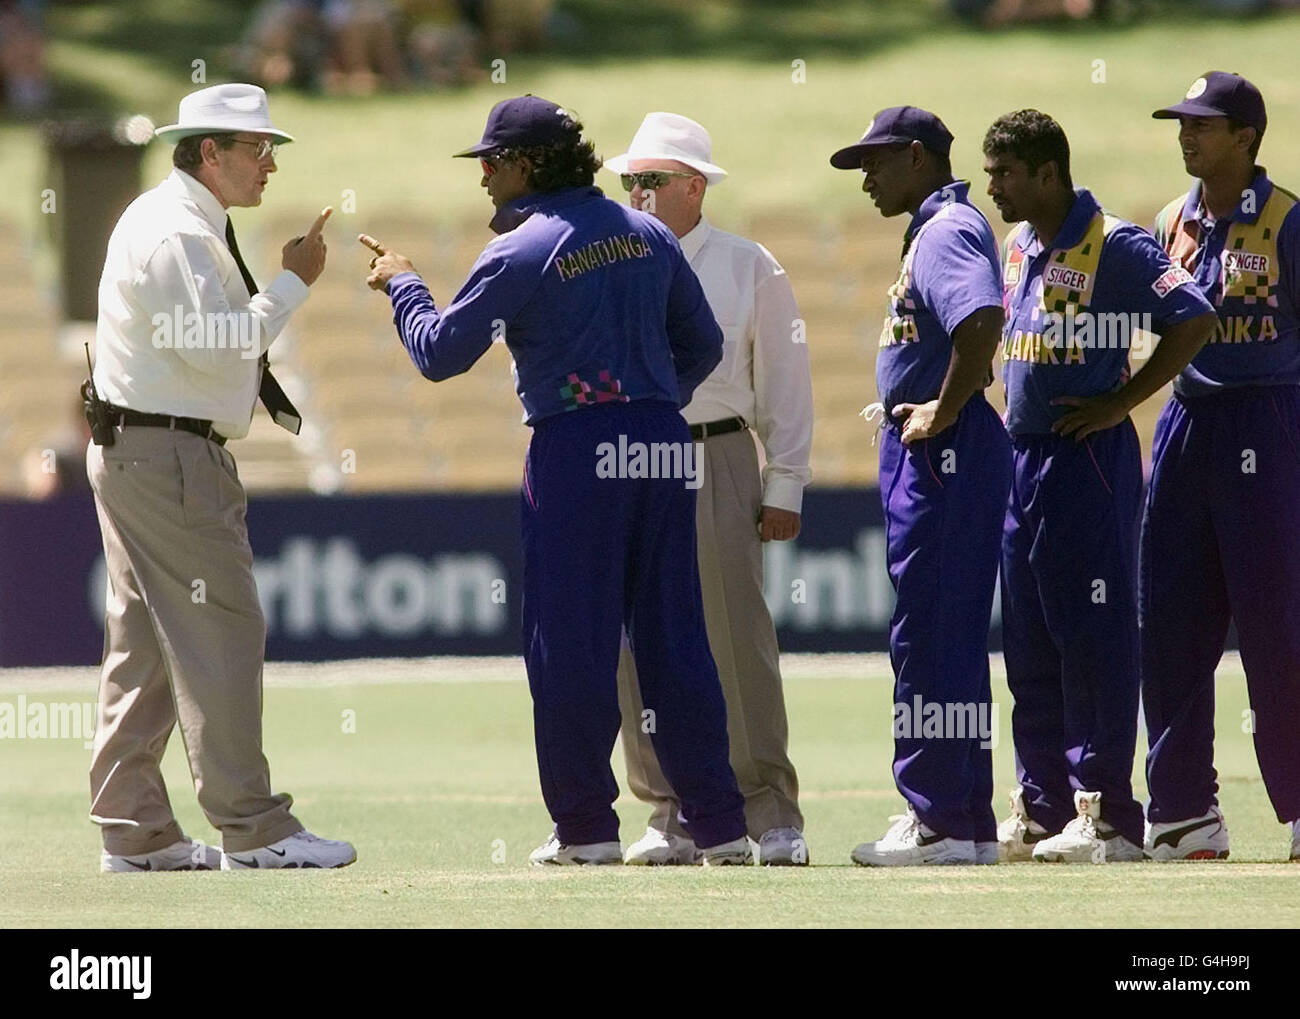 Sri Lankan Captain Arjuna Ranatunga (2nd left) engages in heated discussion with umpires Ross Emerson (left) and Anthony McQuillan after bowler Muttiah Muralitharan (2nd right) was called for chucking in a one-day match against England at the Adelaide Oval. * 28/1/99: Ranatunga fined 75% of match fee and given six-month suspended sentence by ICC disciplinary panel over incident. Stock Photo